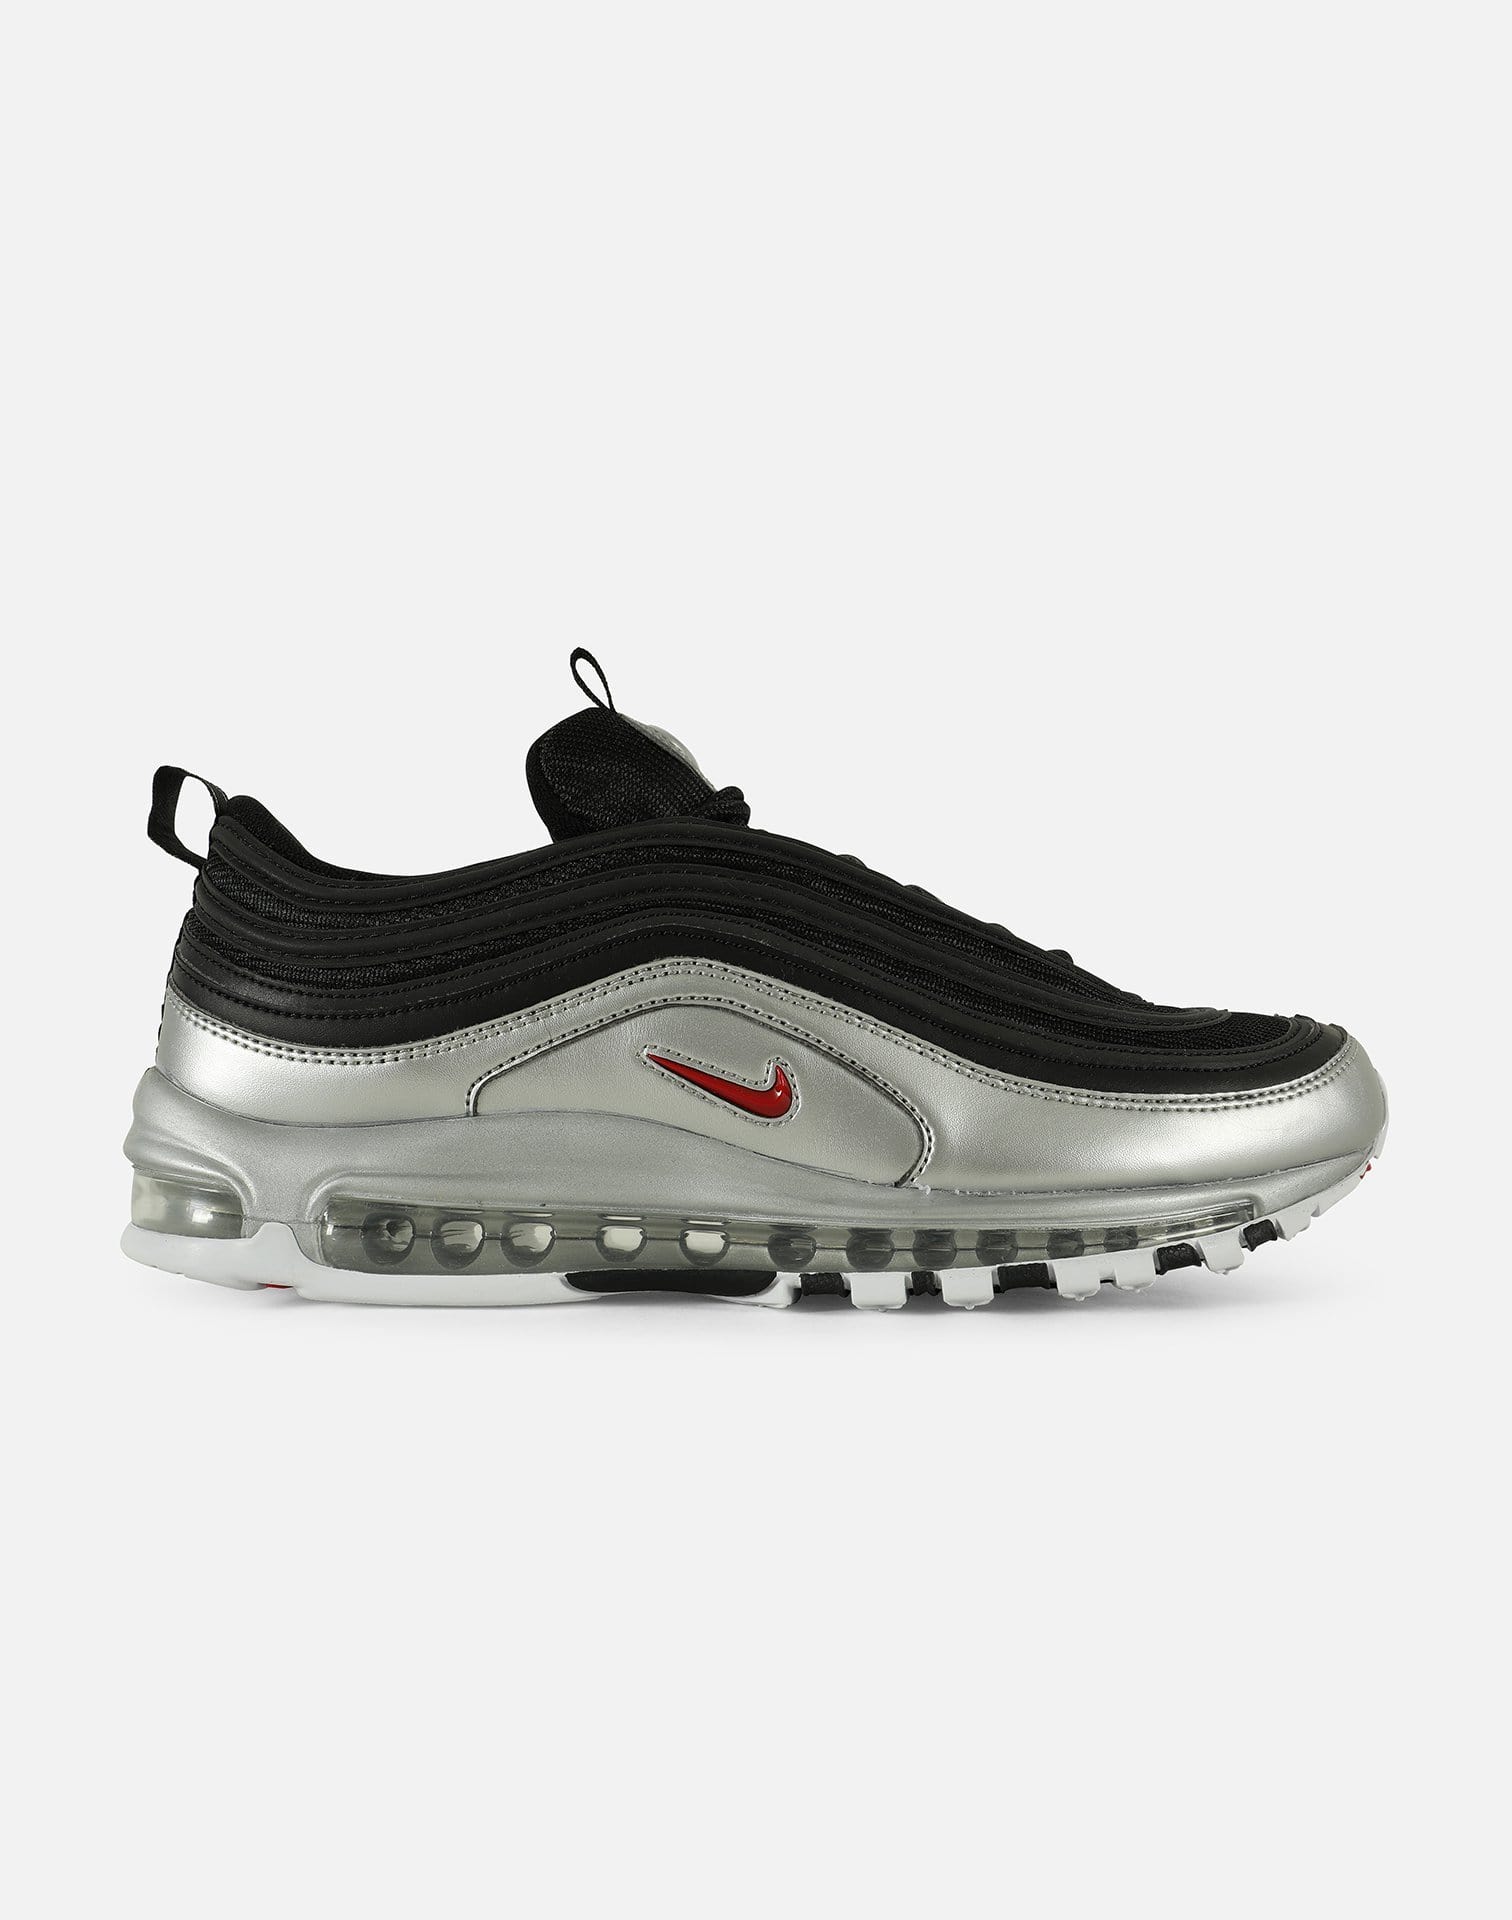 Nike Air Max 97 Grey Suede Premium 921826 002 Outlet